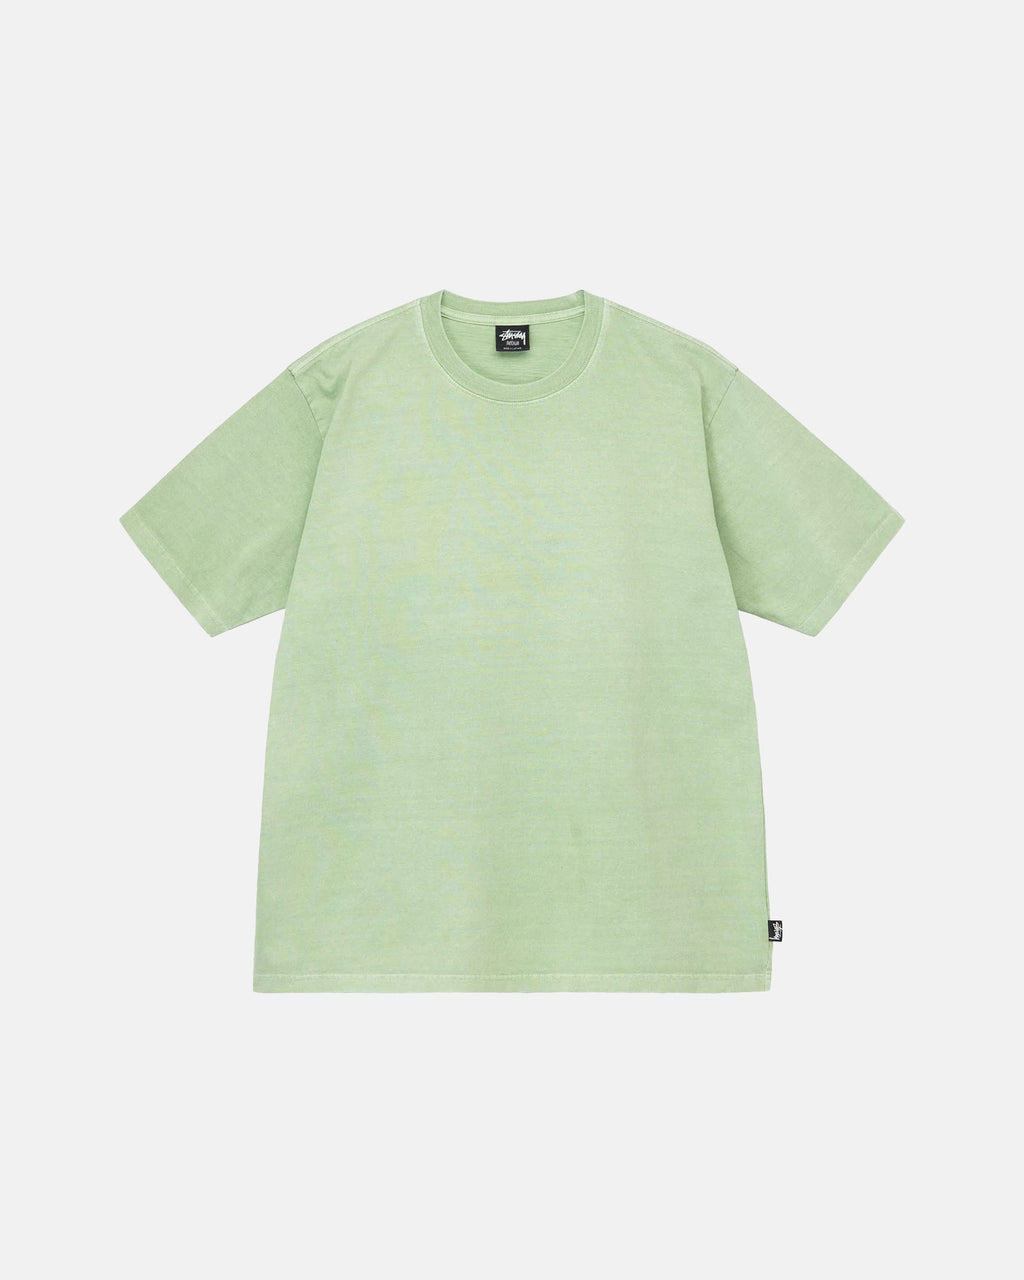 Buy From Stussy Tee Malaysia Online Store - Green Heavyweight